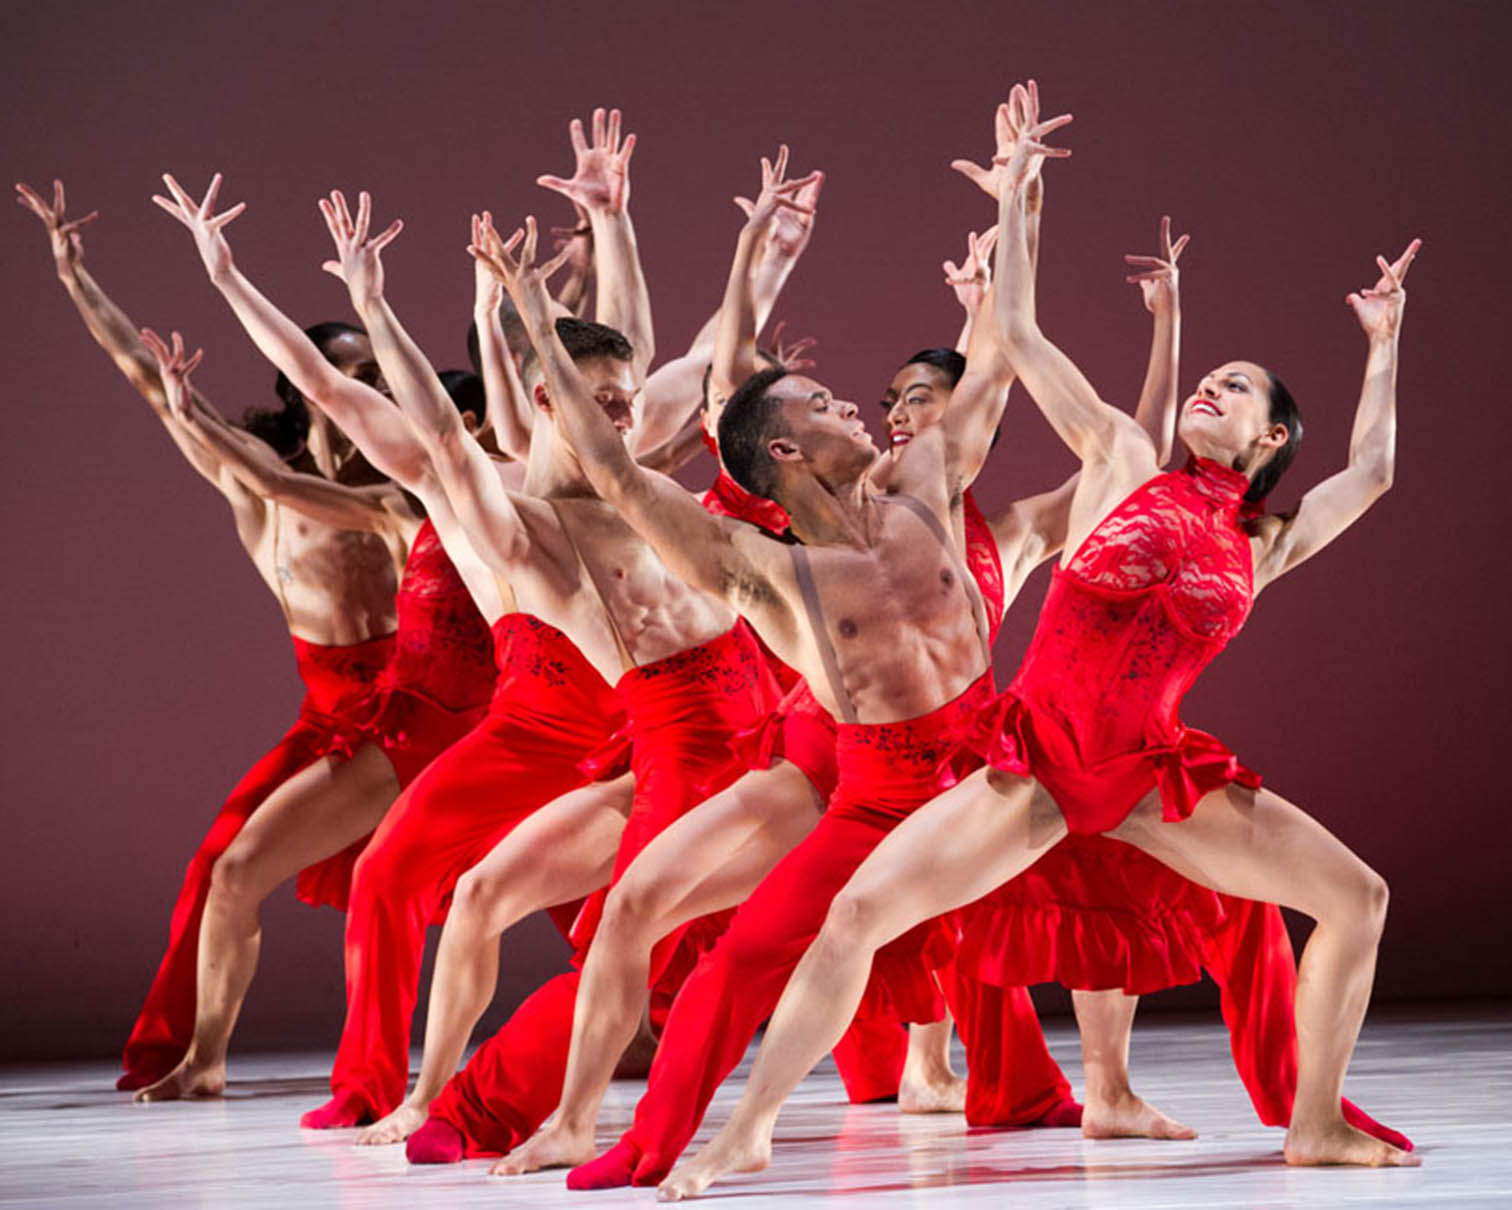 ballet dancers on stage in red costumes with arms raised